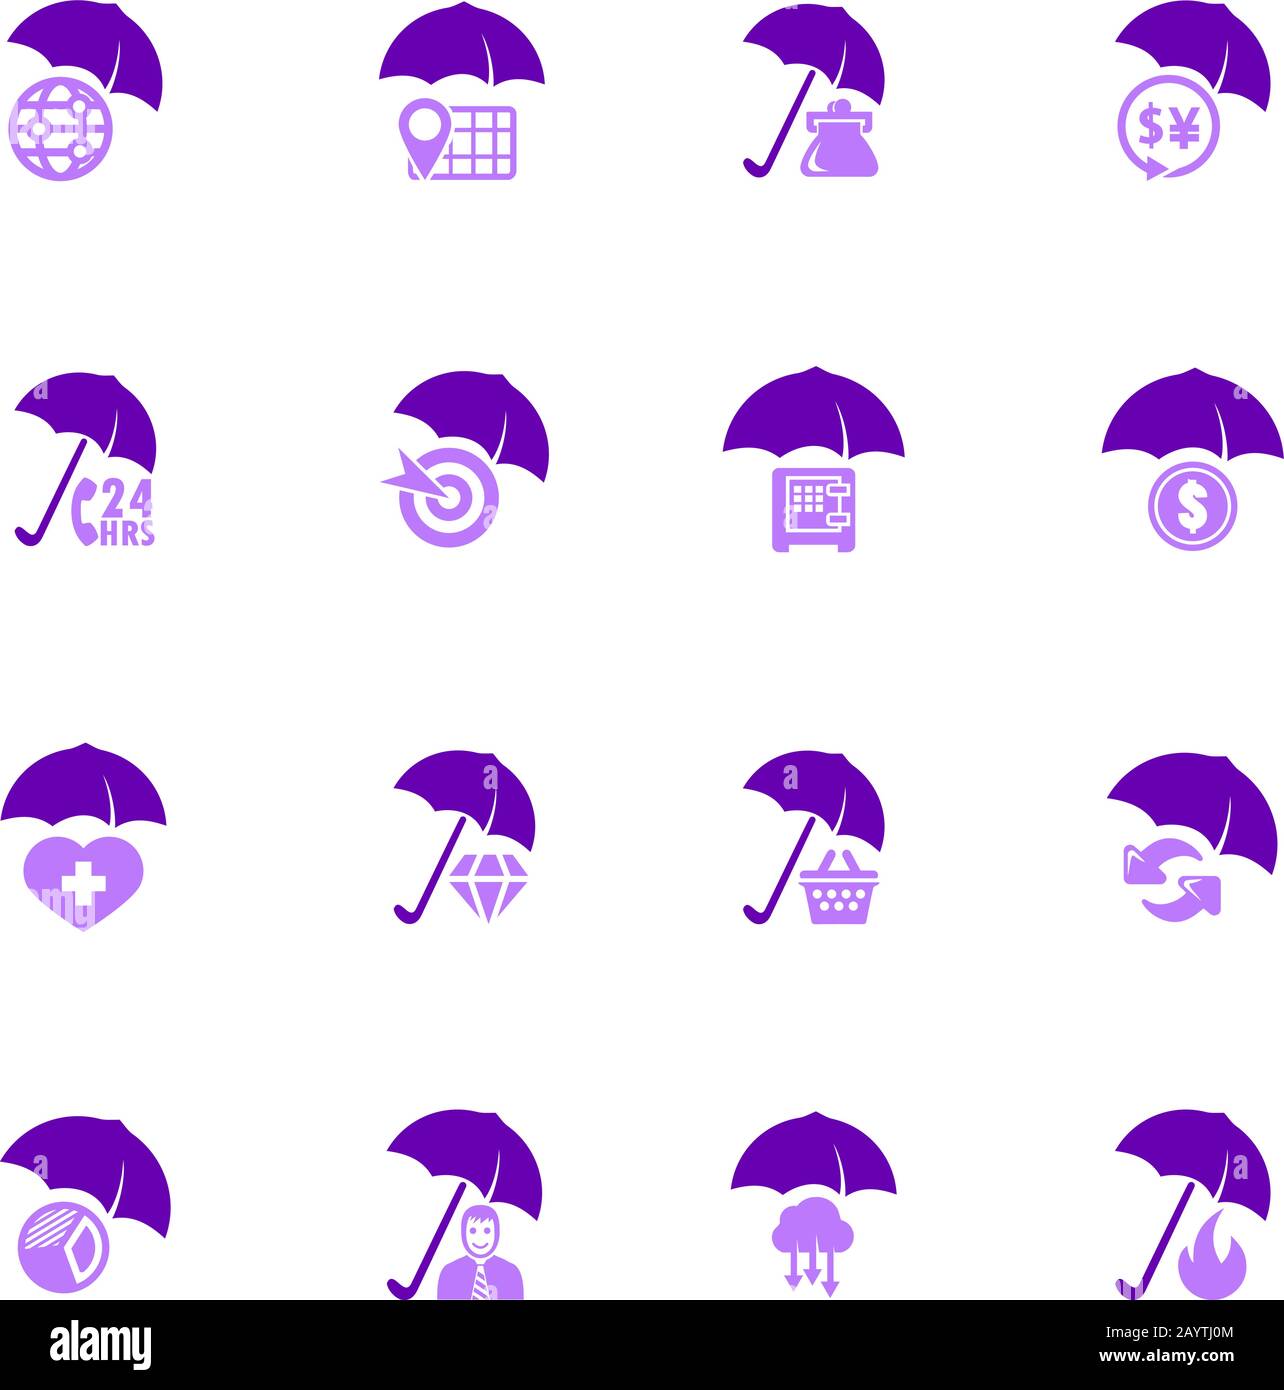 Insurance icons set Stock Vector